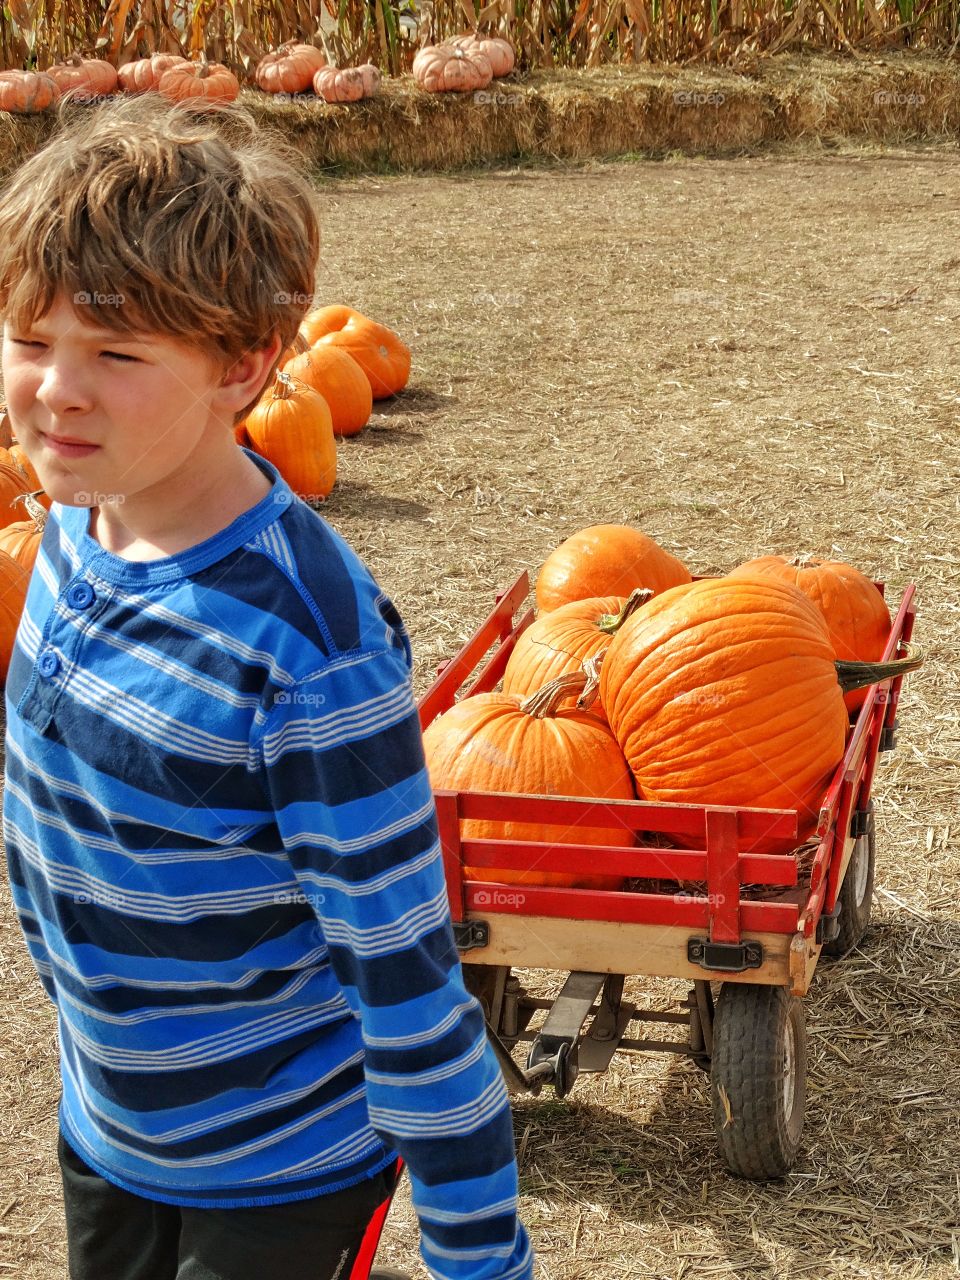 Young Boy At The Pumpkin Patch
